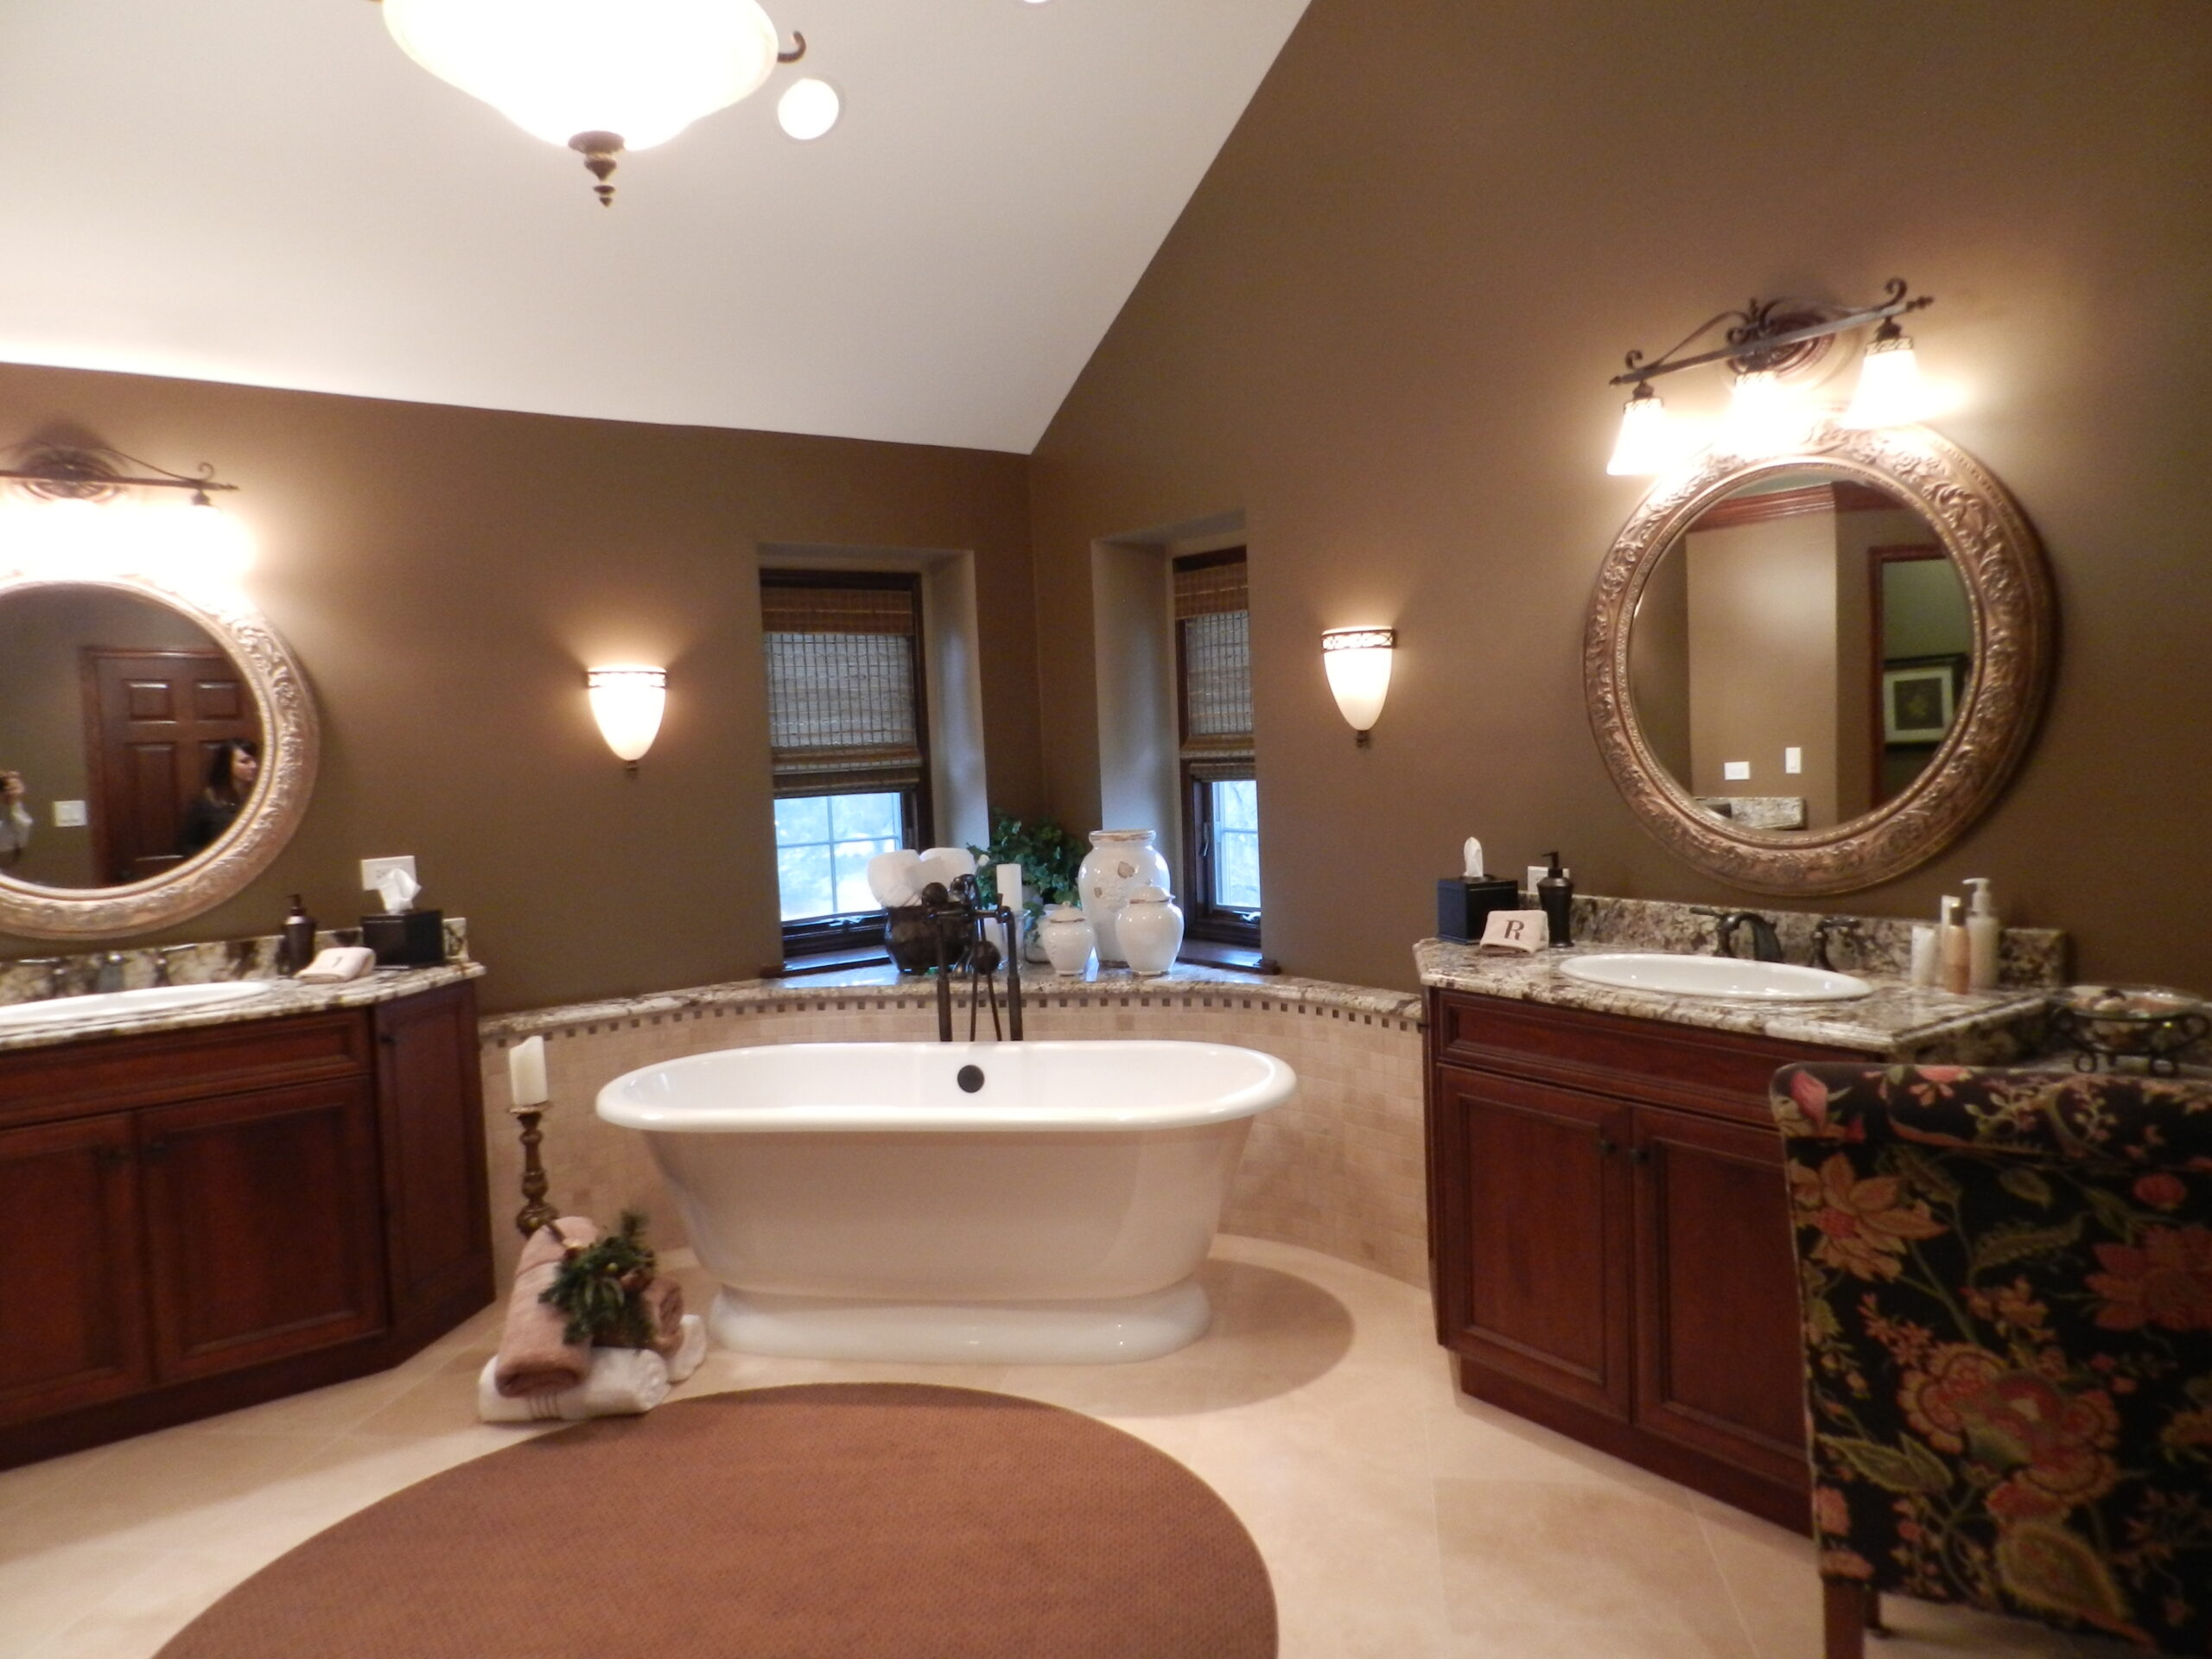 bathroom scene with bathtub, vanities, flooring | GMD Surfaces in Chicagoland and Northwest Indiana